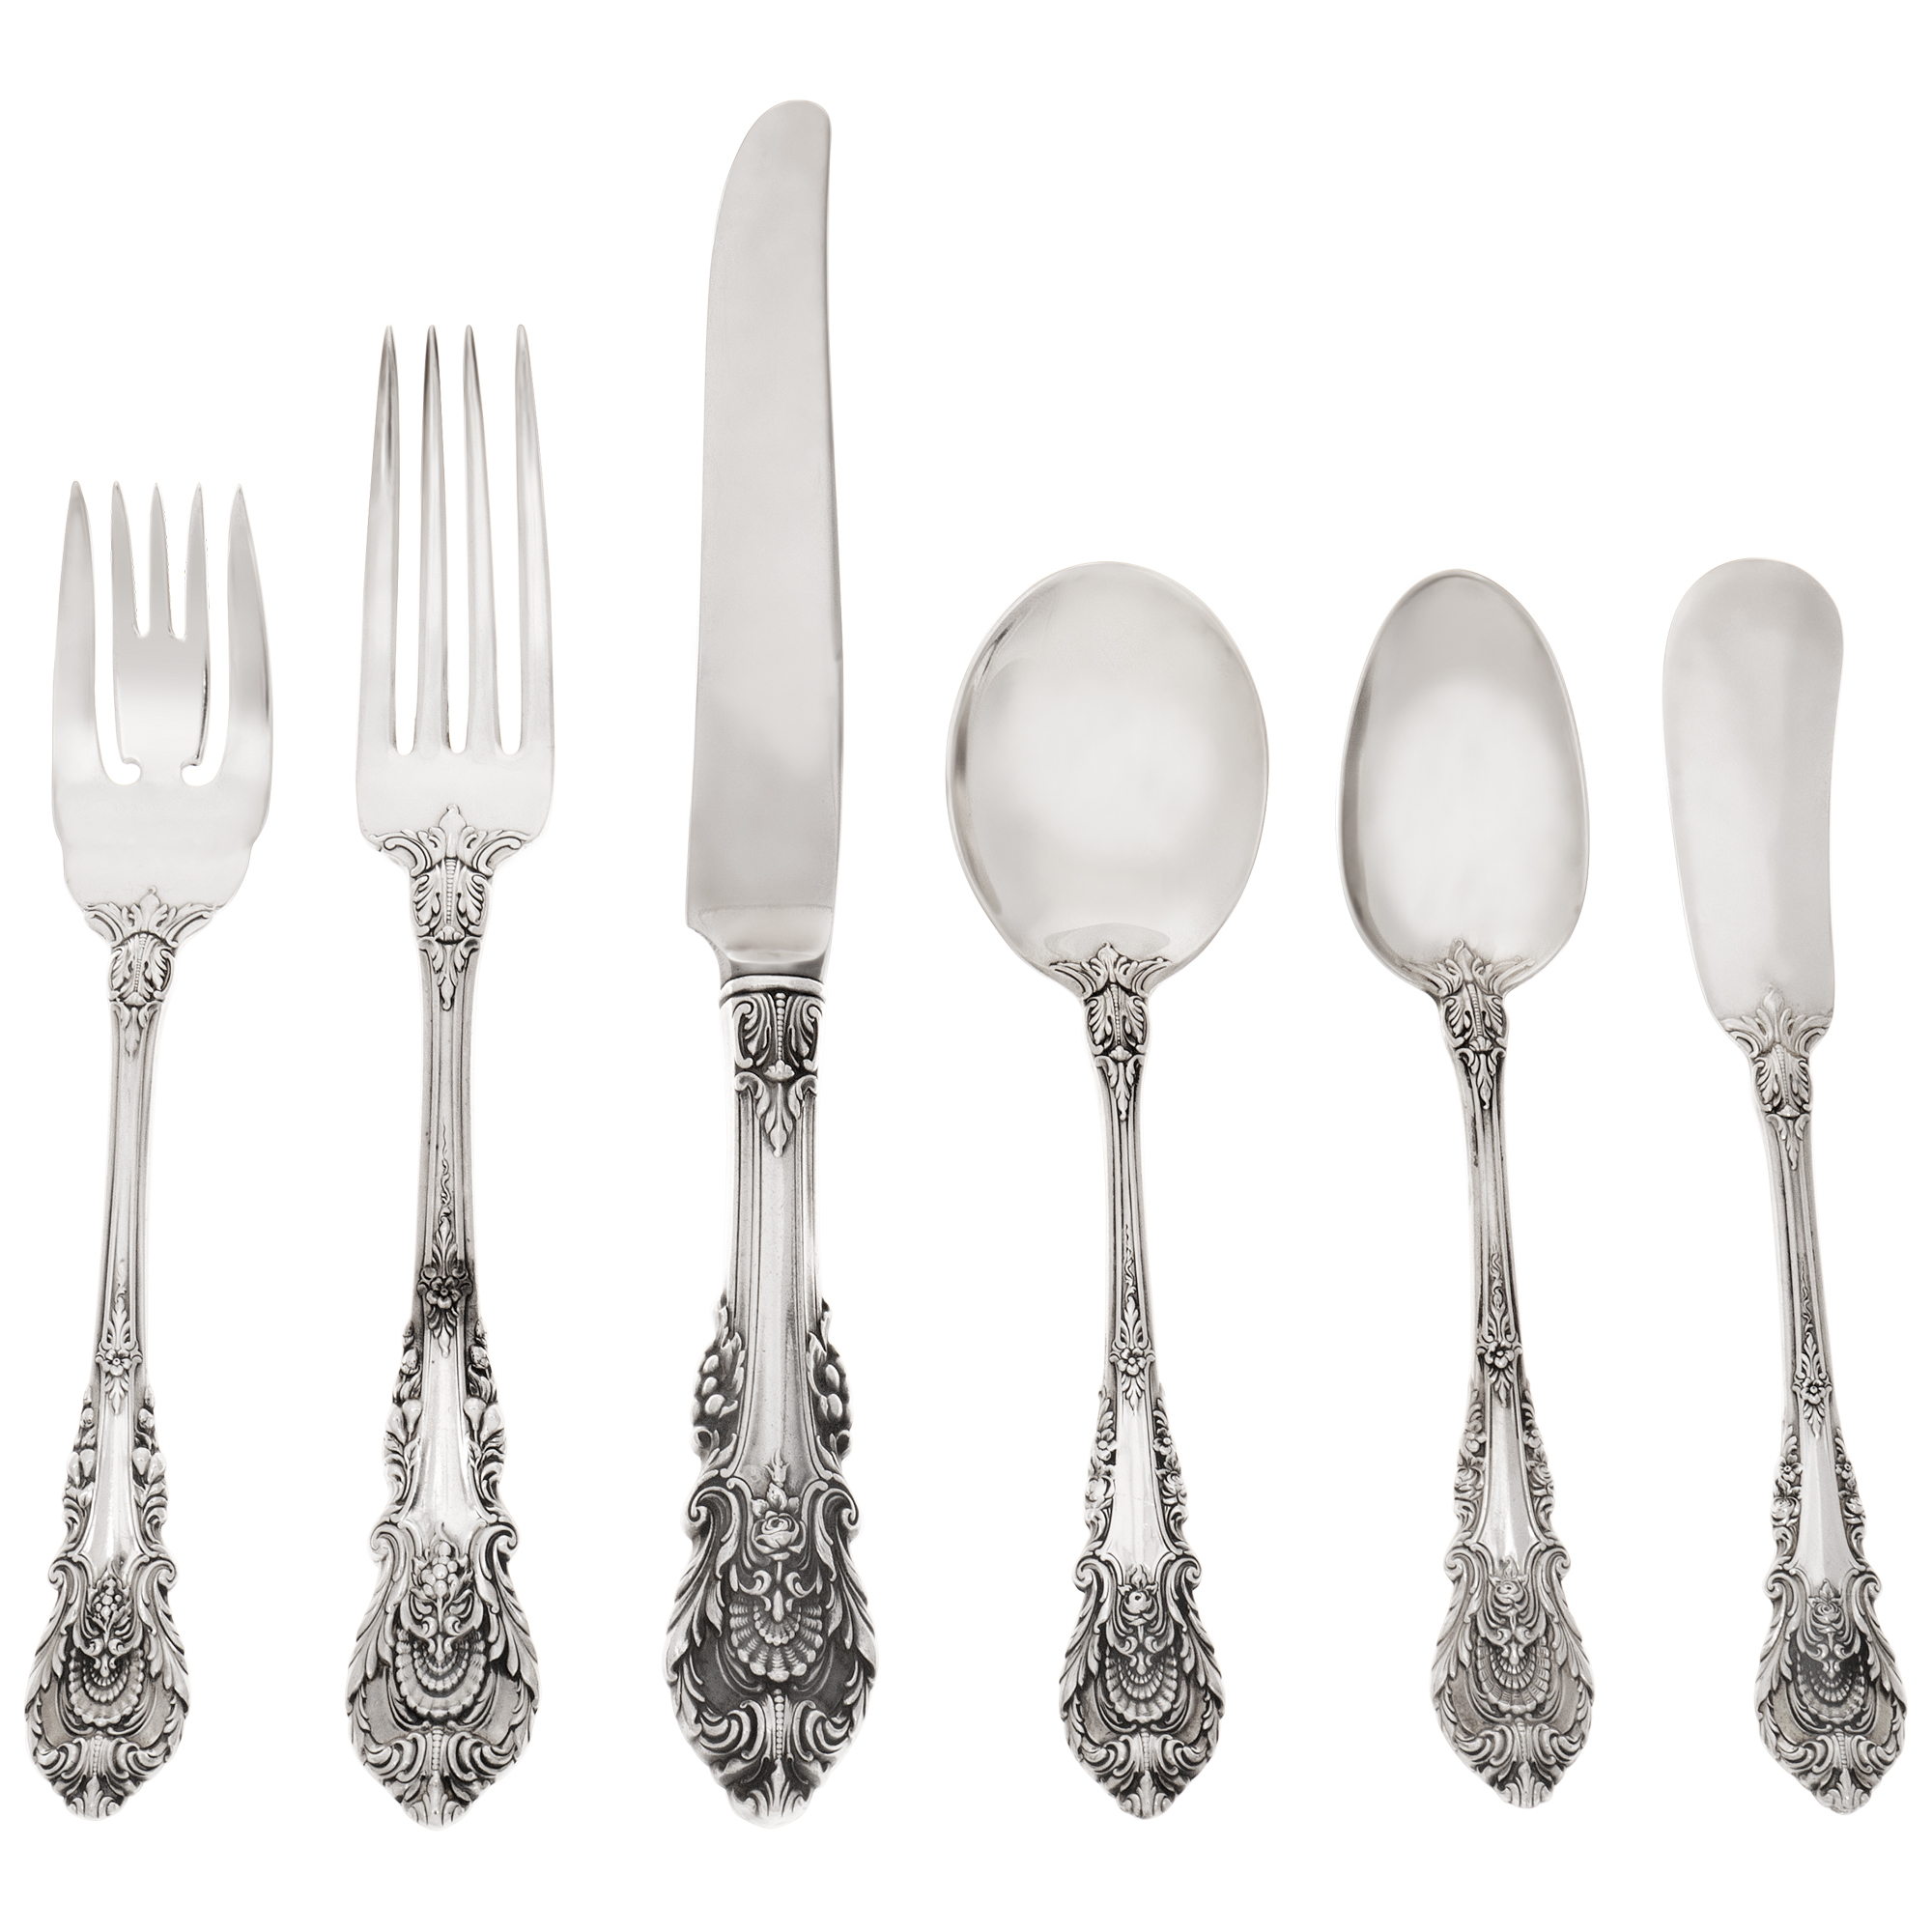 SIR CHRISTOPHER sterling silver flatware set patented in 1936 by Walla